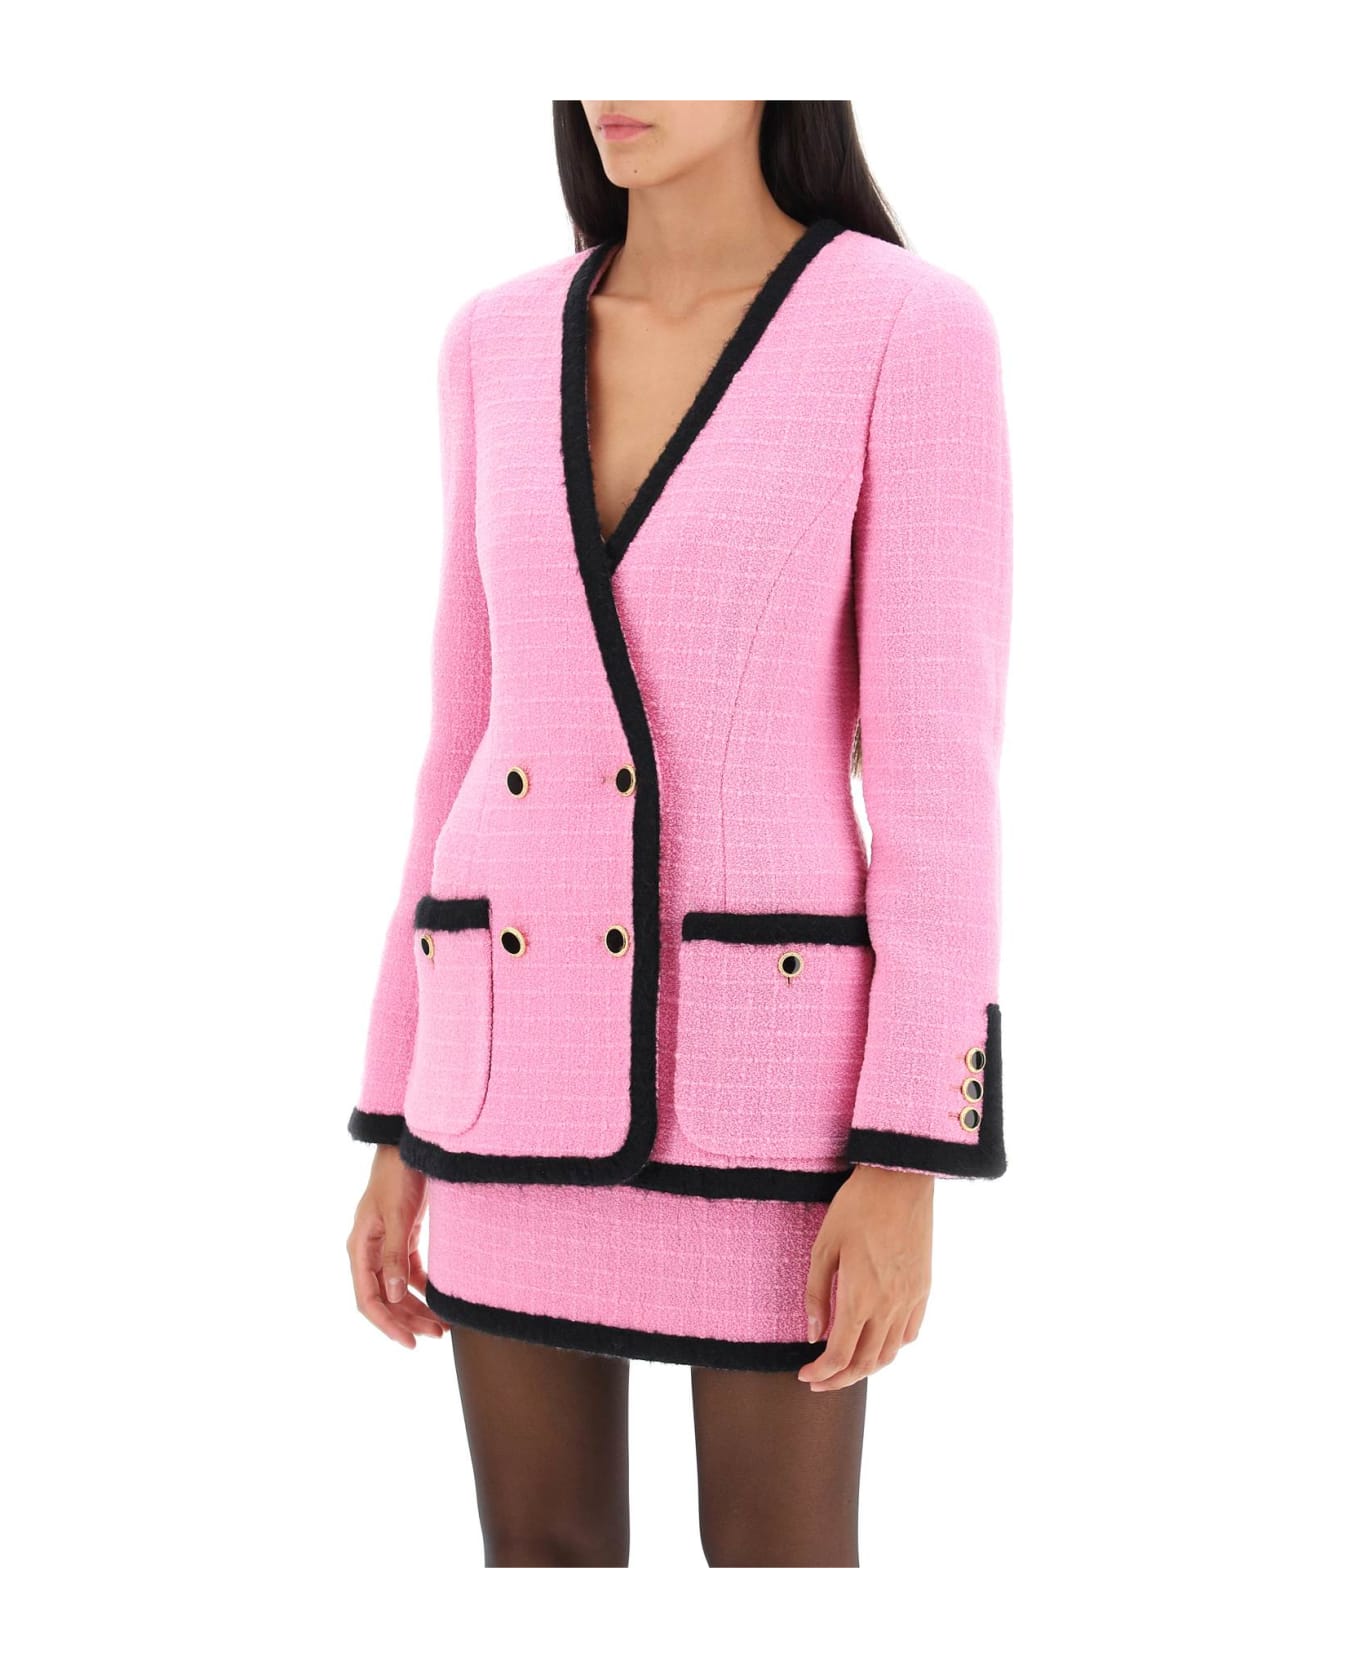 Alessandra Rich Double-breasted Boucle Tweed Jacket - PINK (Pink)